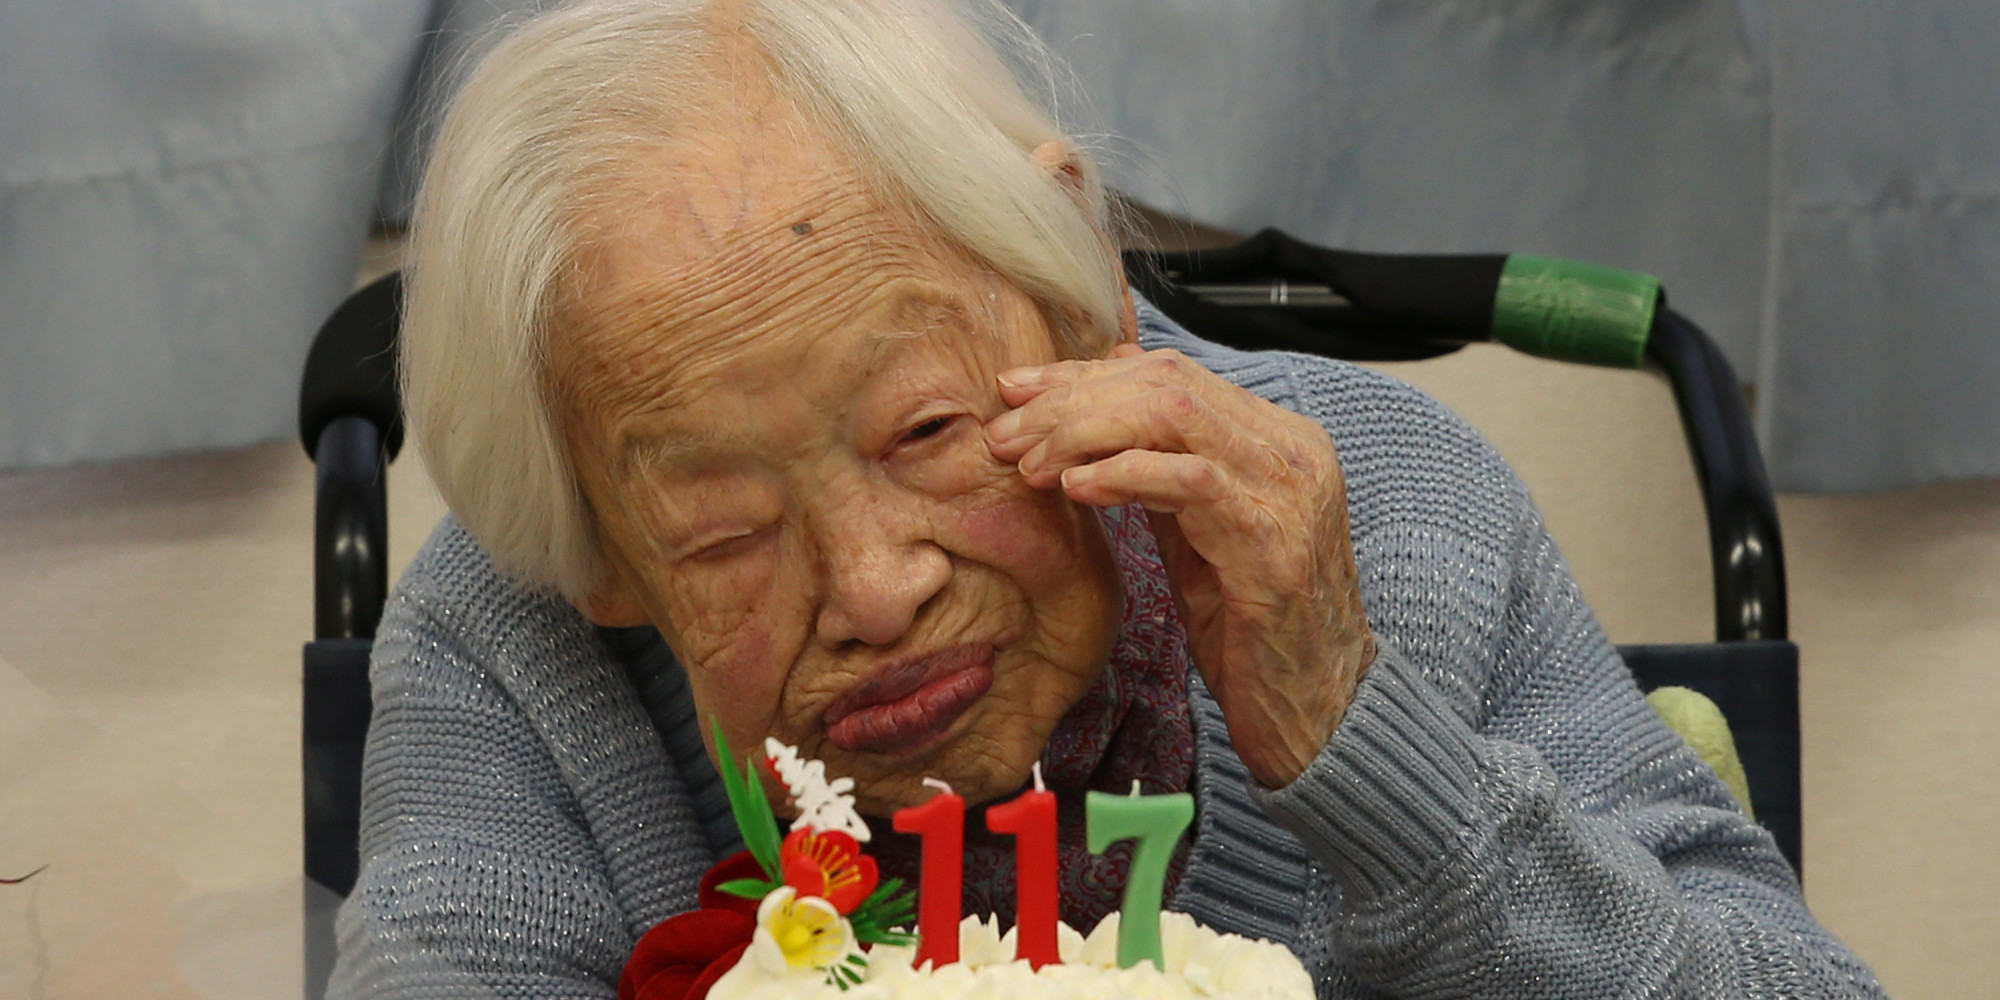 The Oldest Person In The World Misao Okawa Dies At 117 